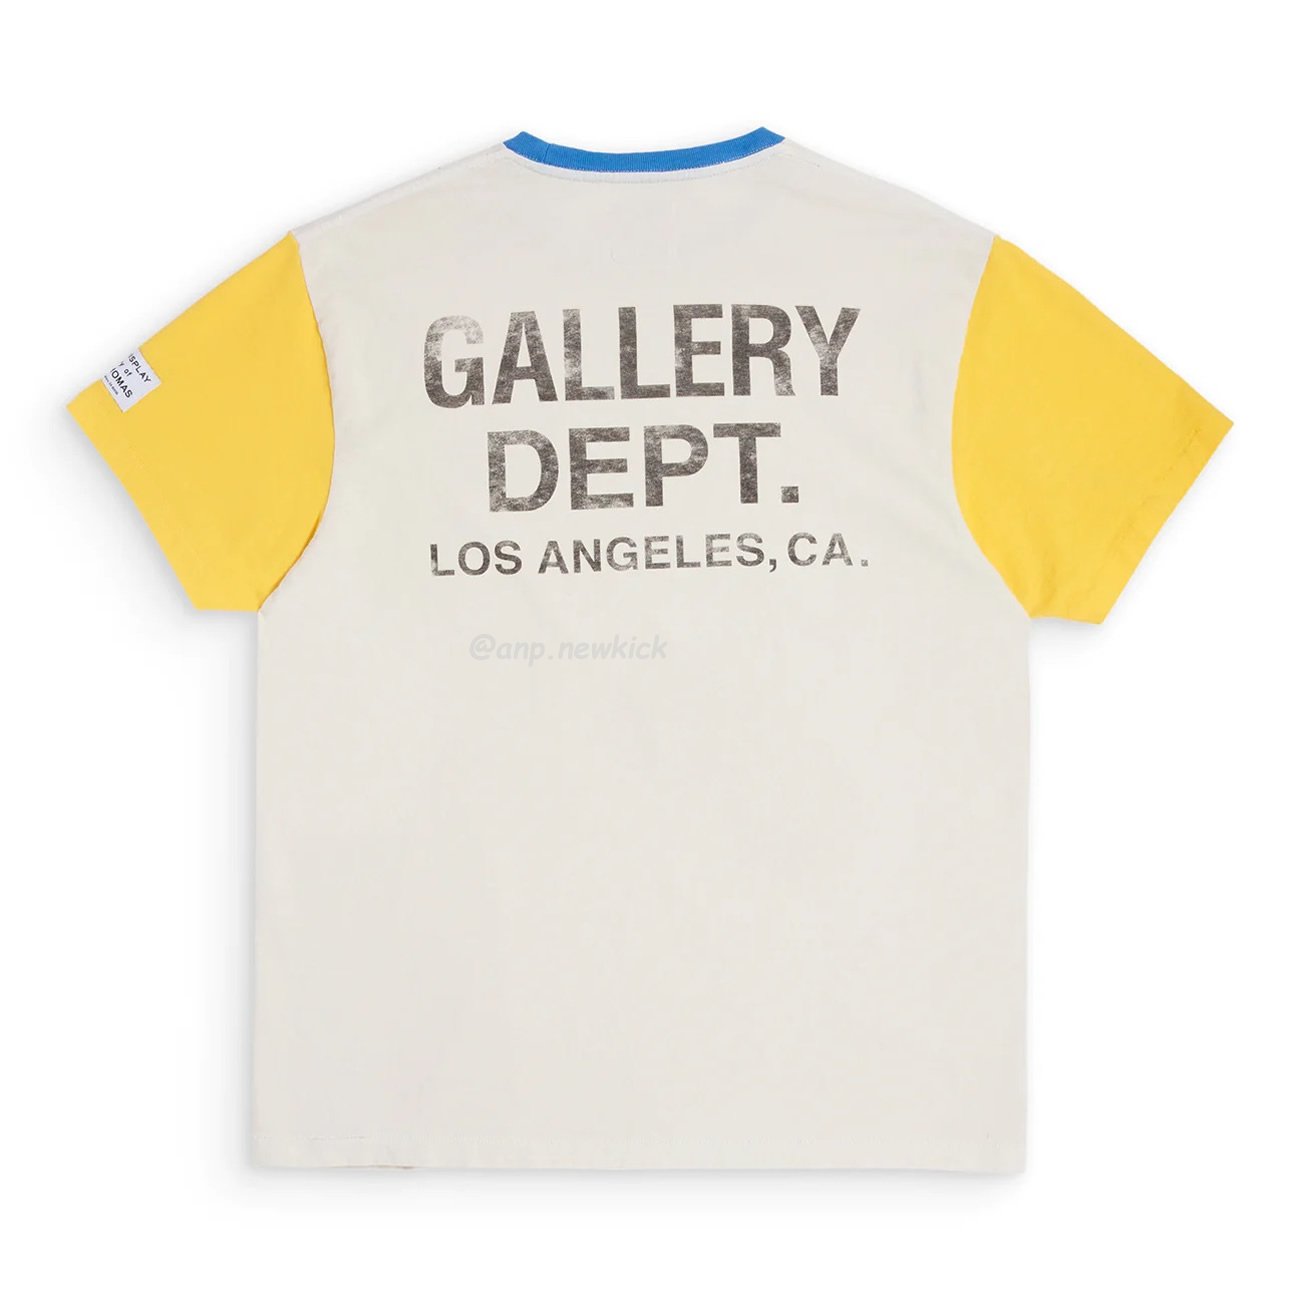 Gallery Dept X La Rams Color Block Tee Rams Co Branded Old Print Contrast Short Sleeve T Shirt (3) - newkick.org